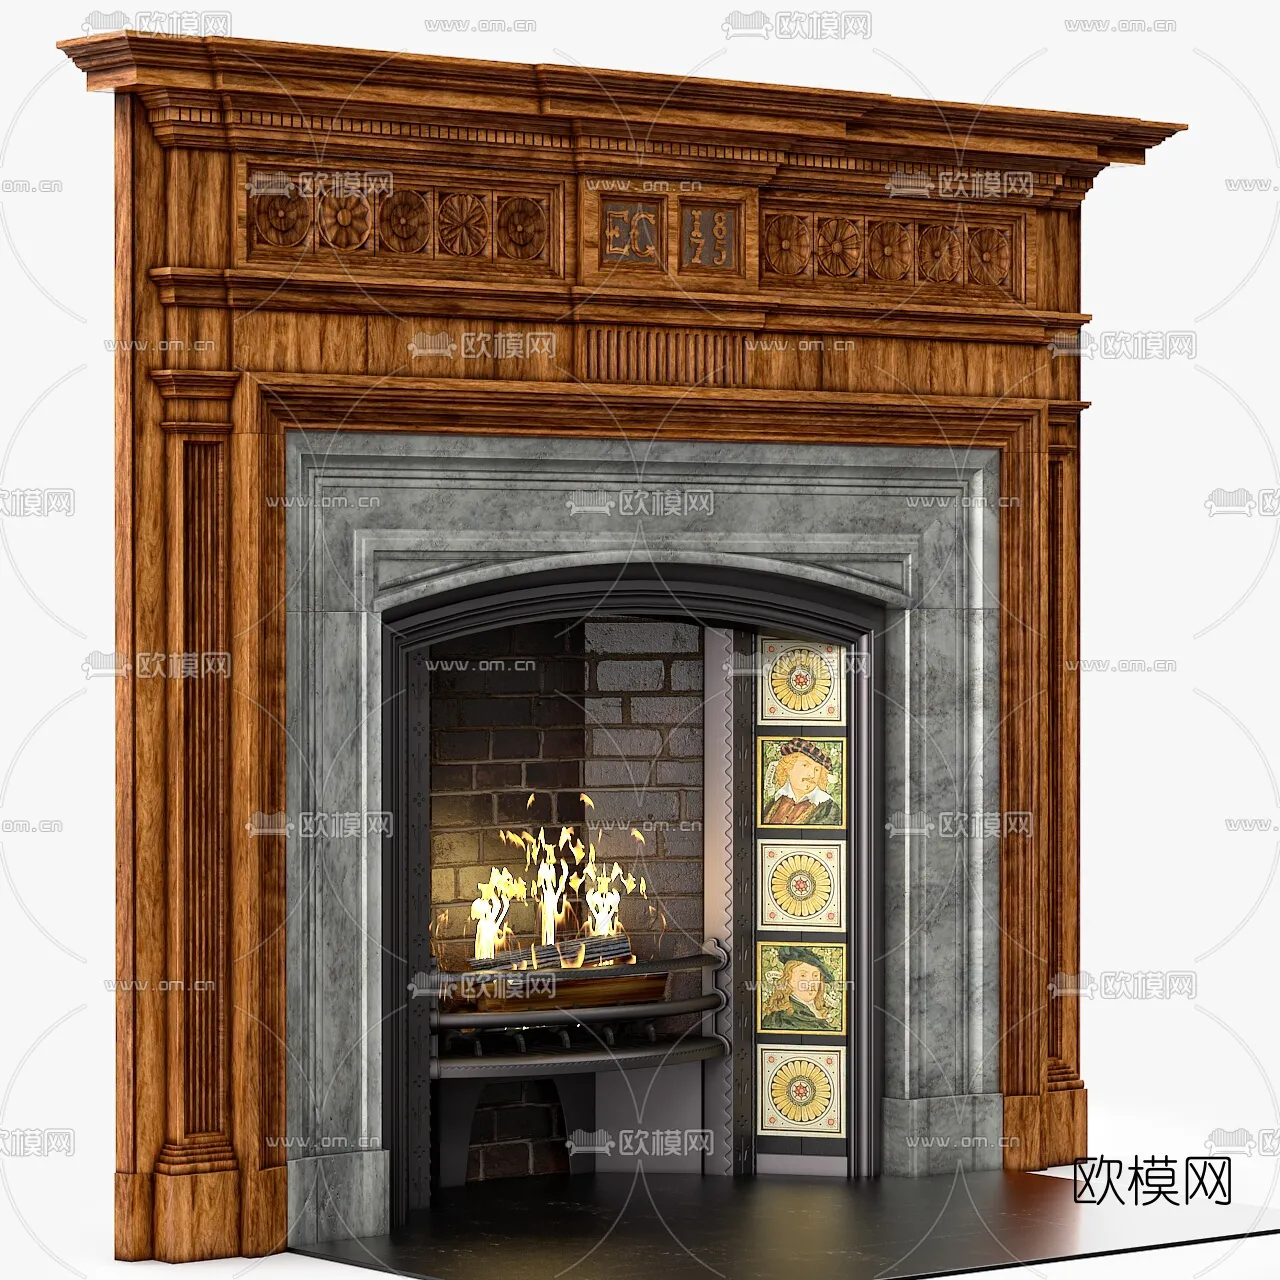 CLASSIC – FIREPLACE 3DMODELS – 028